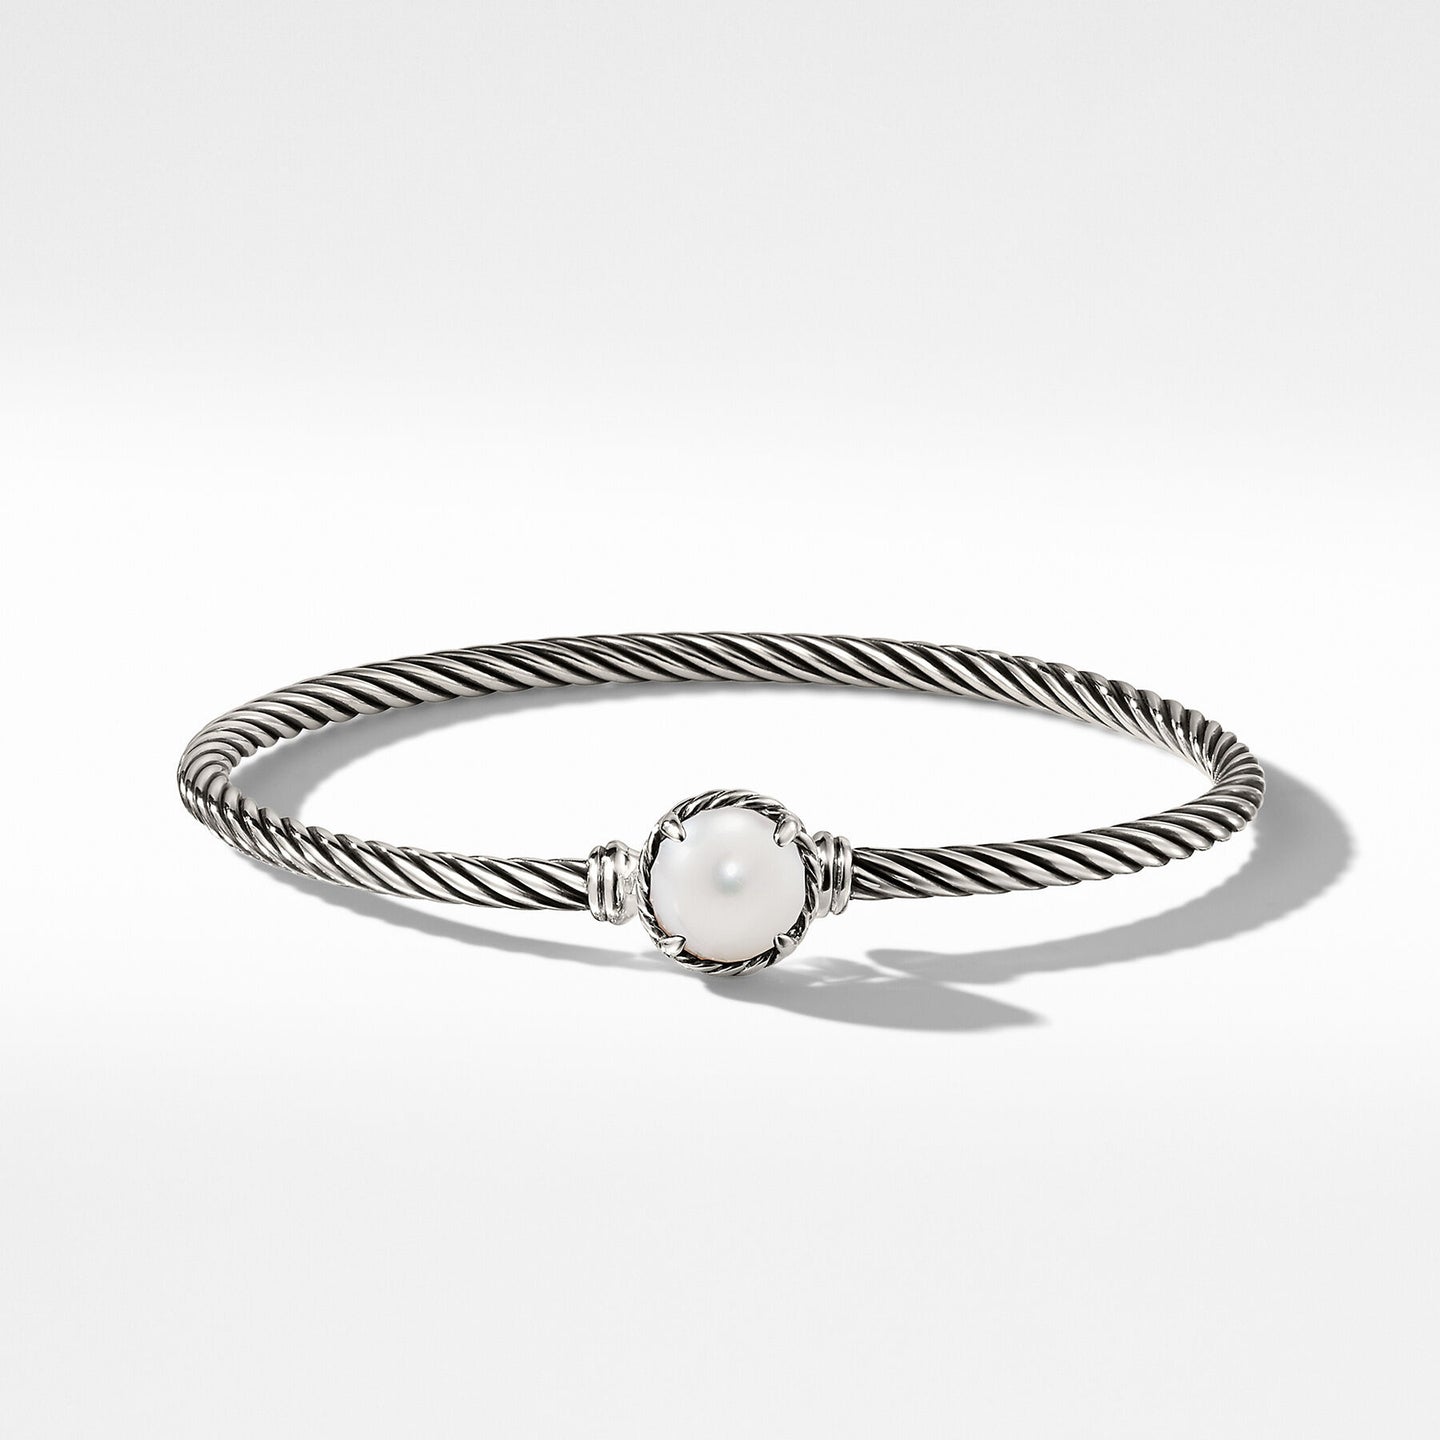 David Yurman The Châtelaine® Collection Bracelet in Sterling Silver (Image 4)